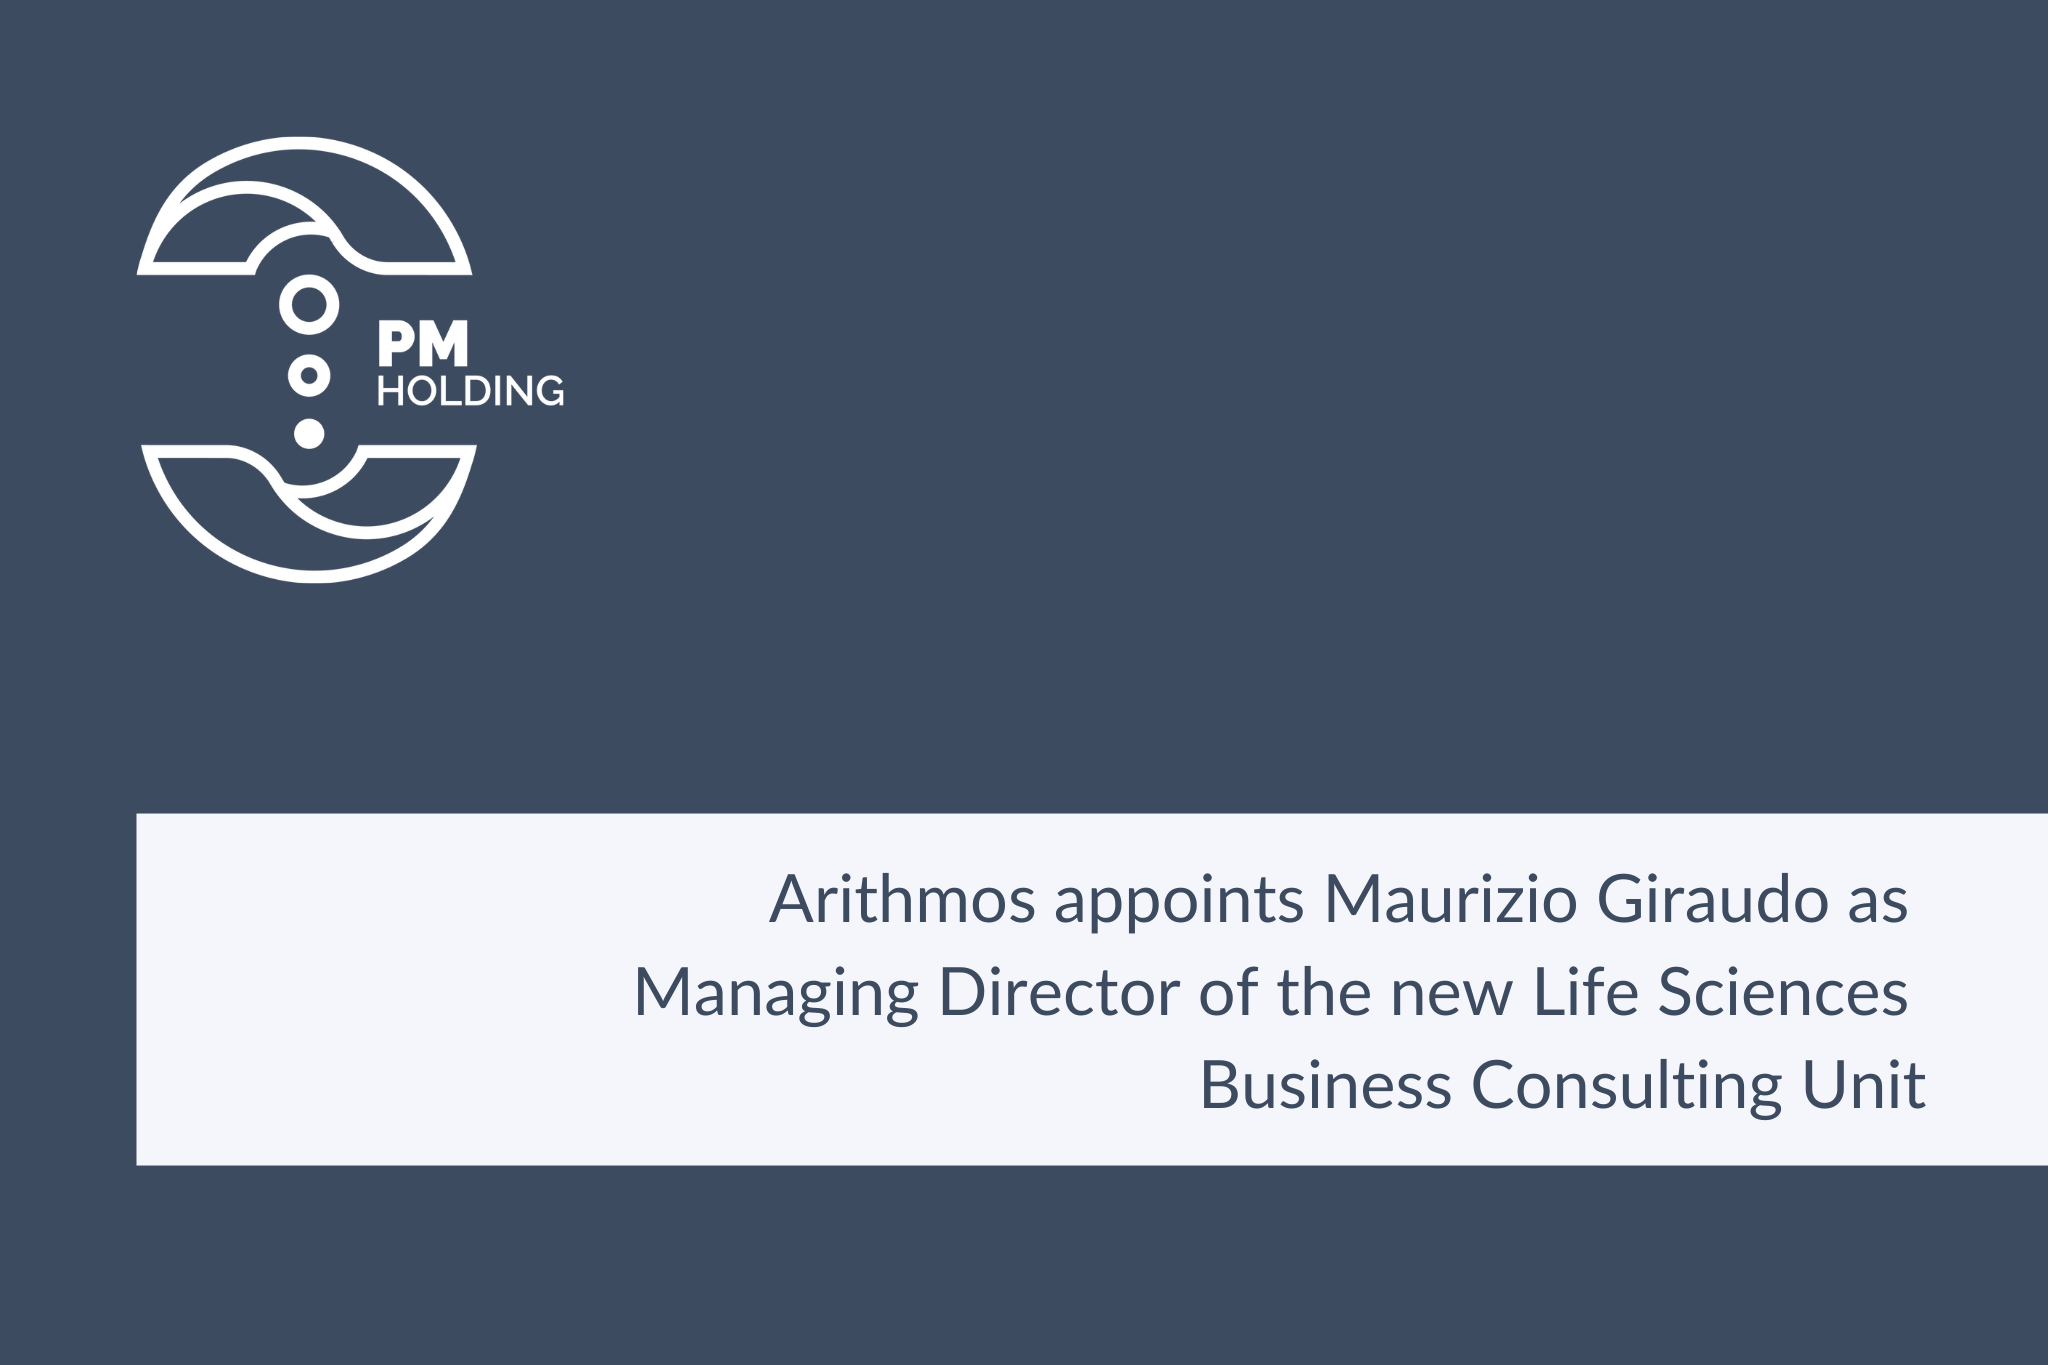 Arithmos appoints Maurizio Giraudo as Managing Director of the new Life Sciences Business Consulting Unit